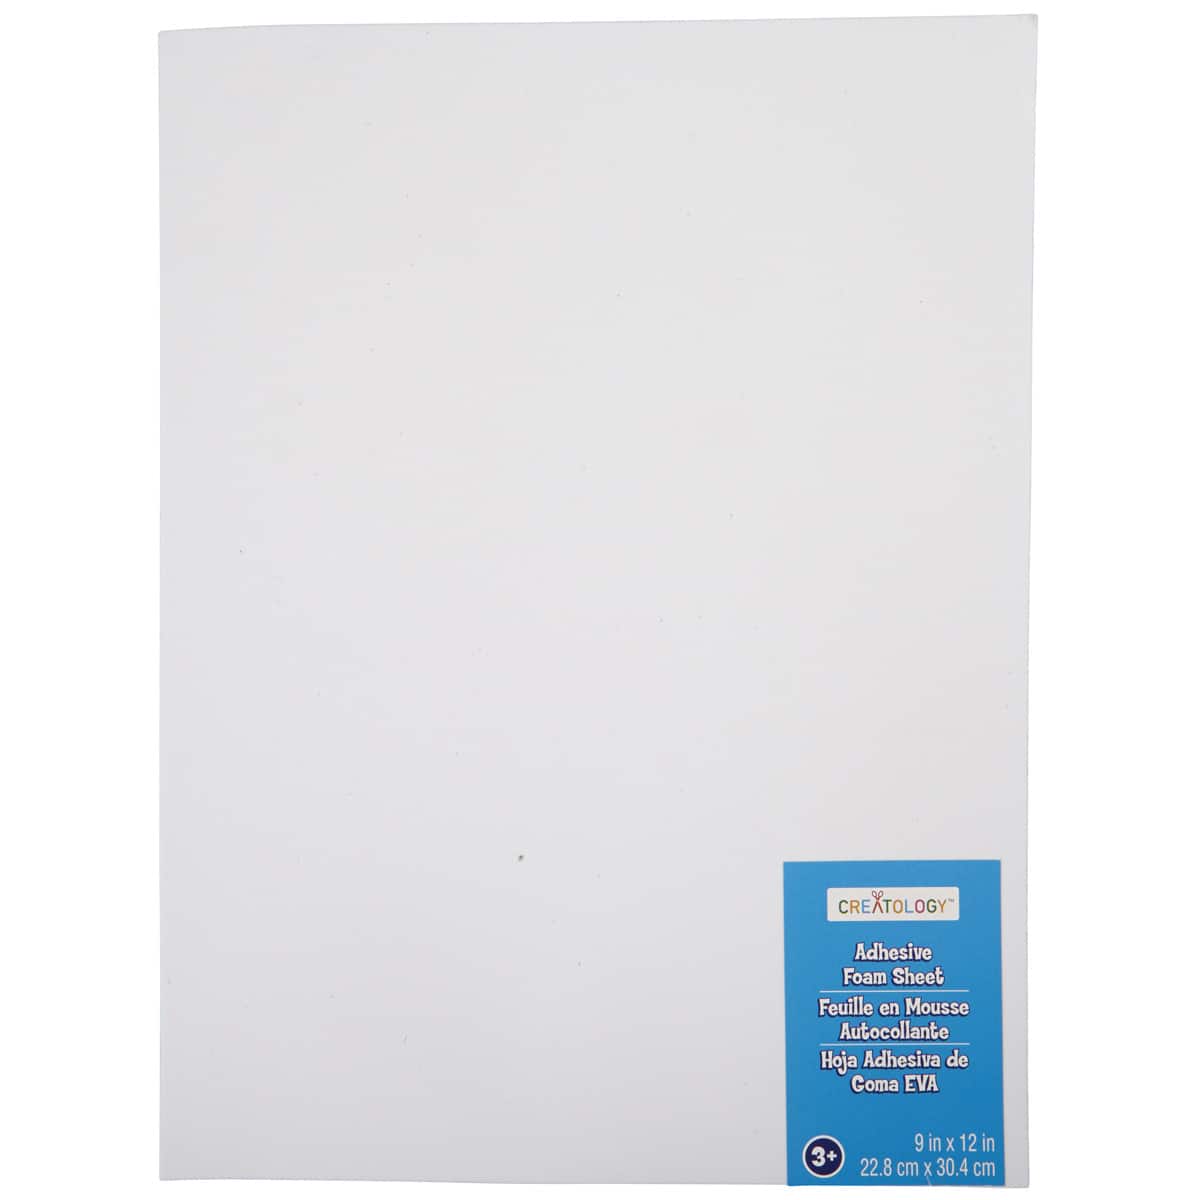 CleverDelights Yellow Foam Sheets - 8 x 12 - Adhesive Back